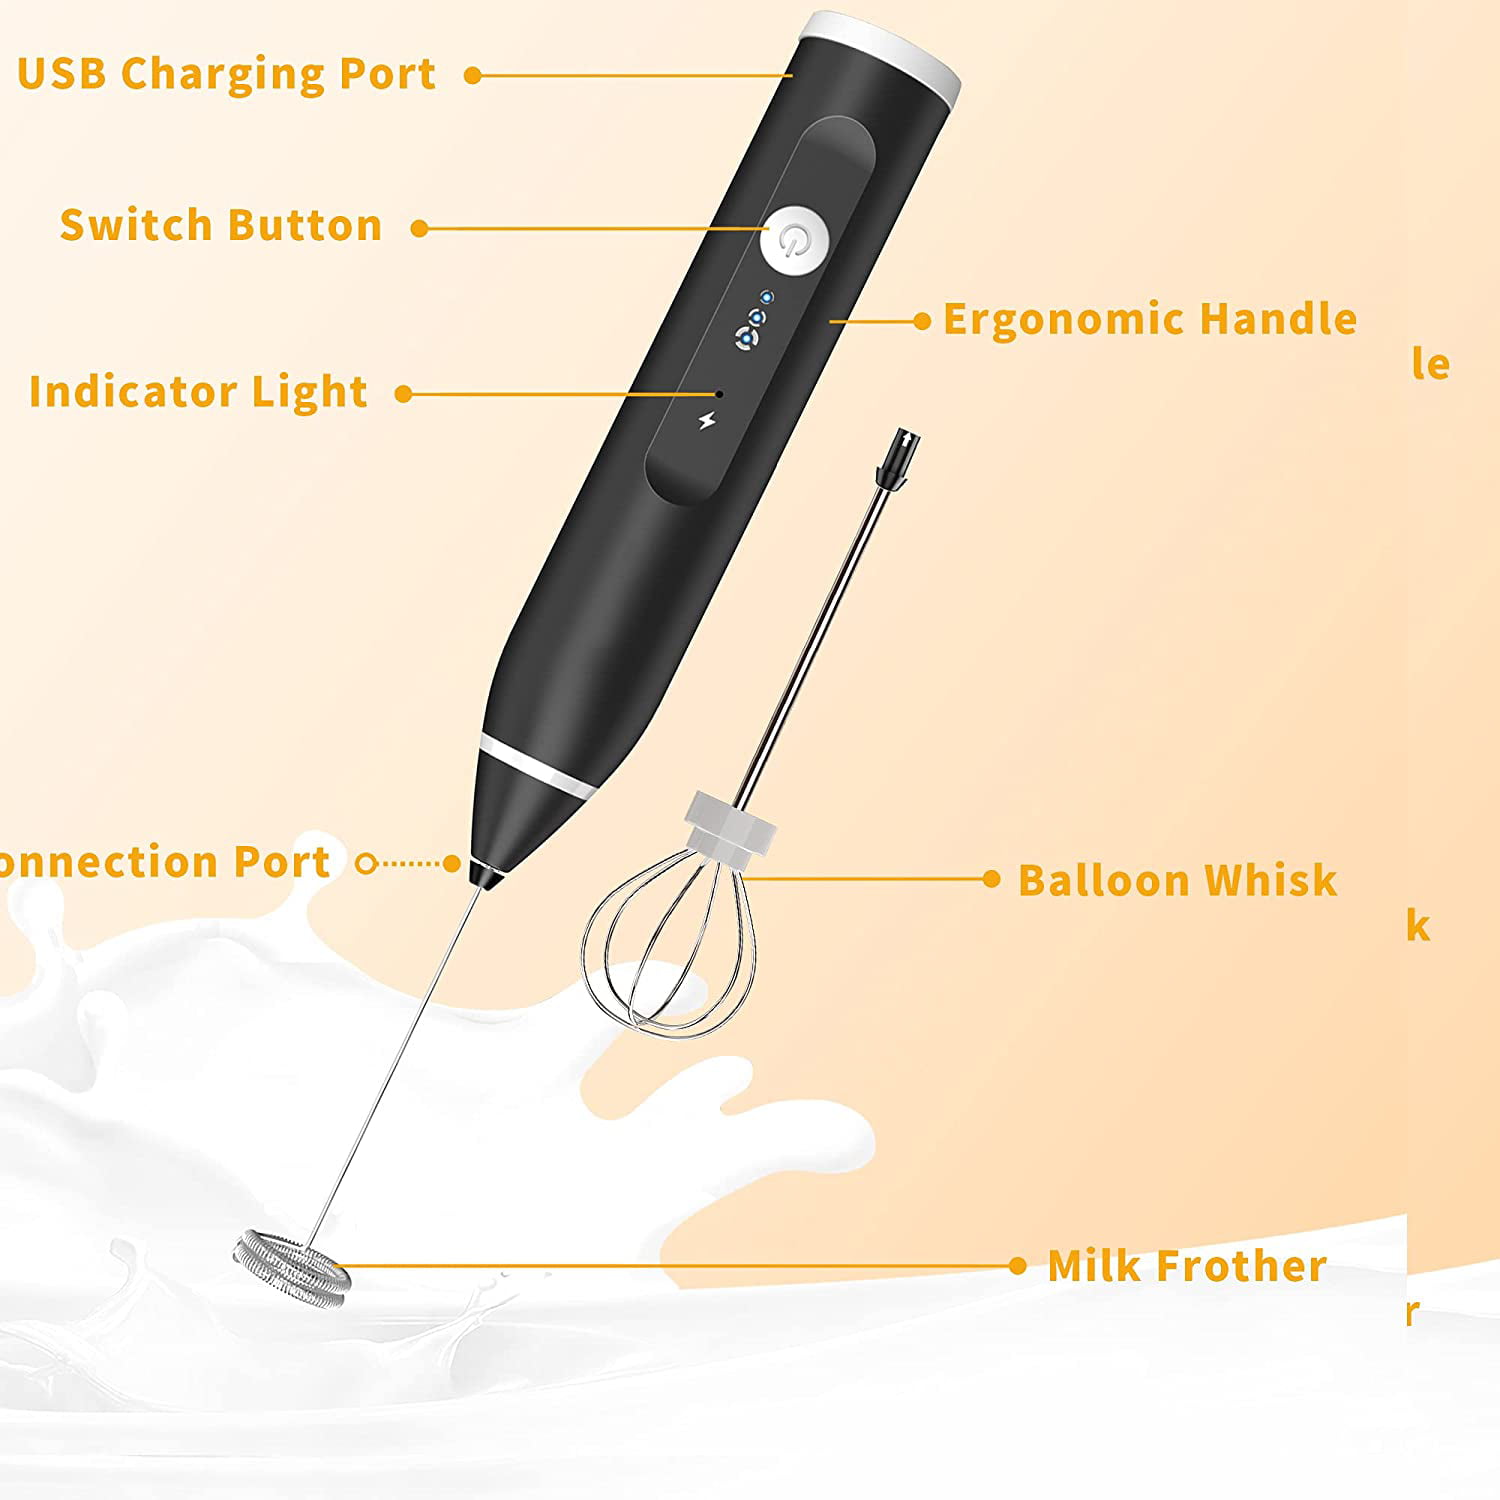 LUNASEA Handheld Milk Frother with Stand, Frother Wand, Electric frother  for Coffee Whisk, Hand Mixer Blender Milk Foamer, Drink Mixer, Electric